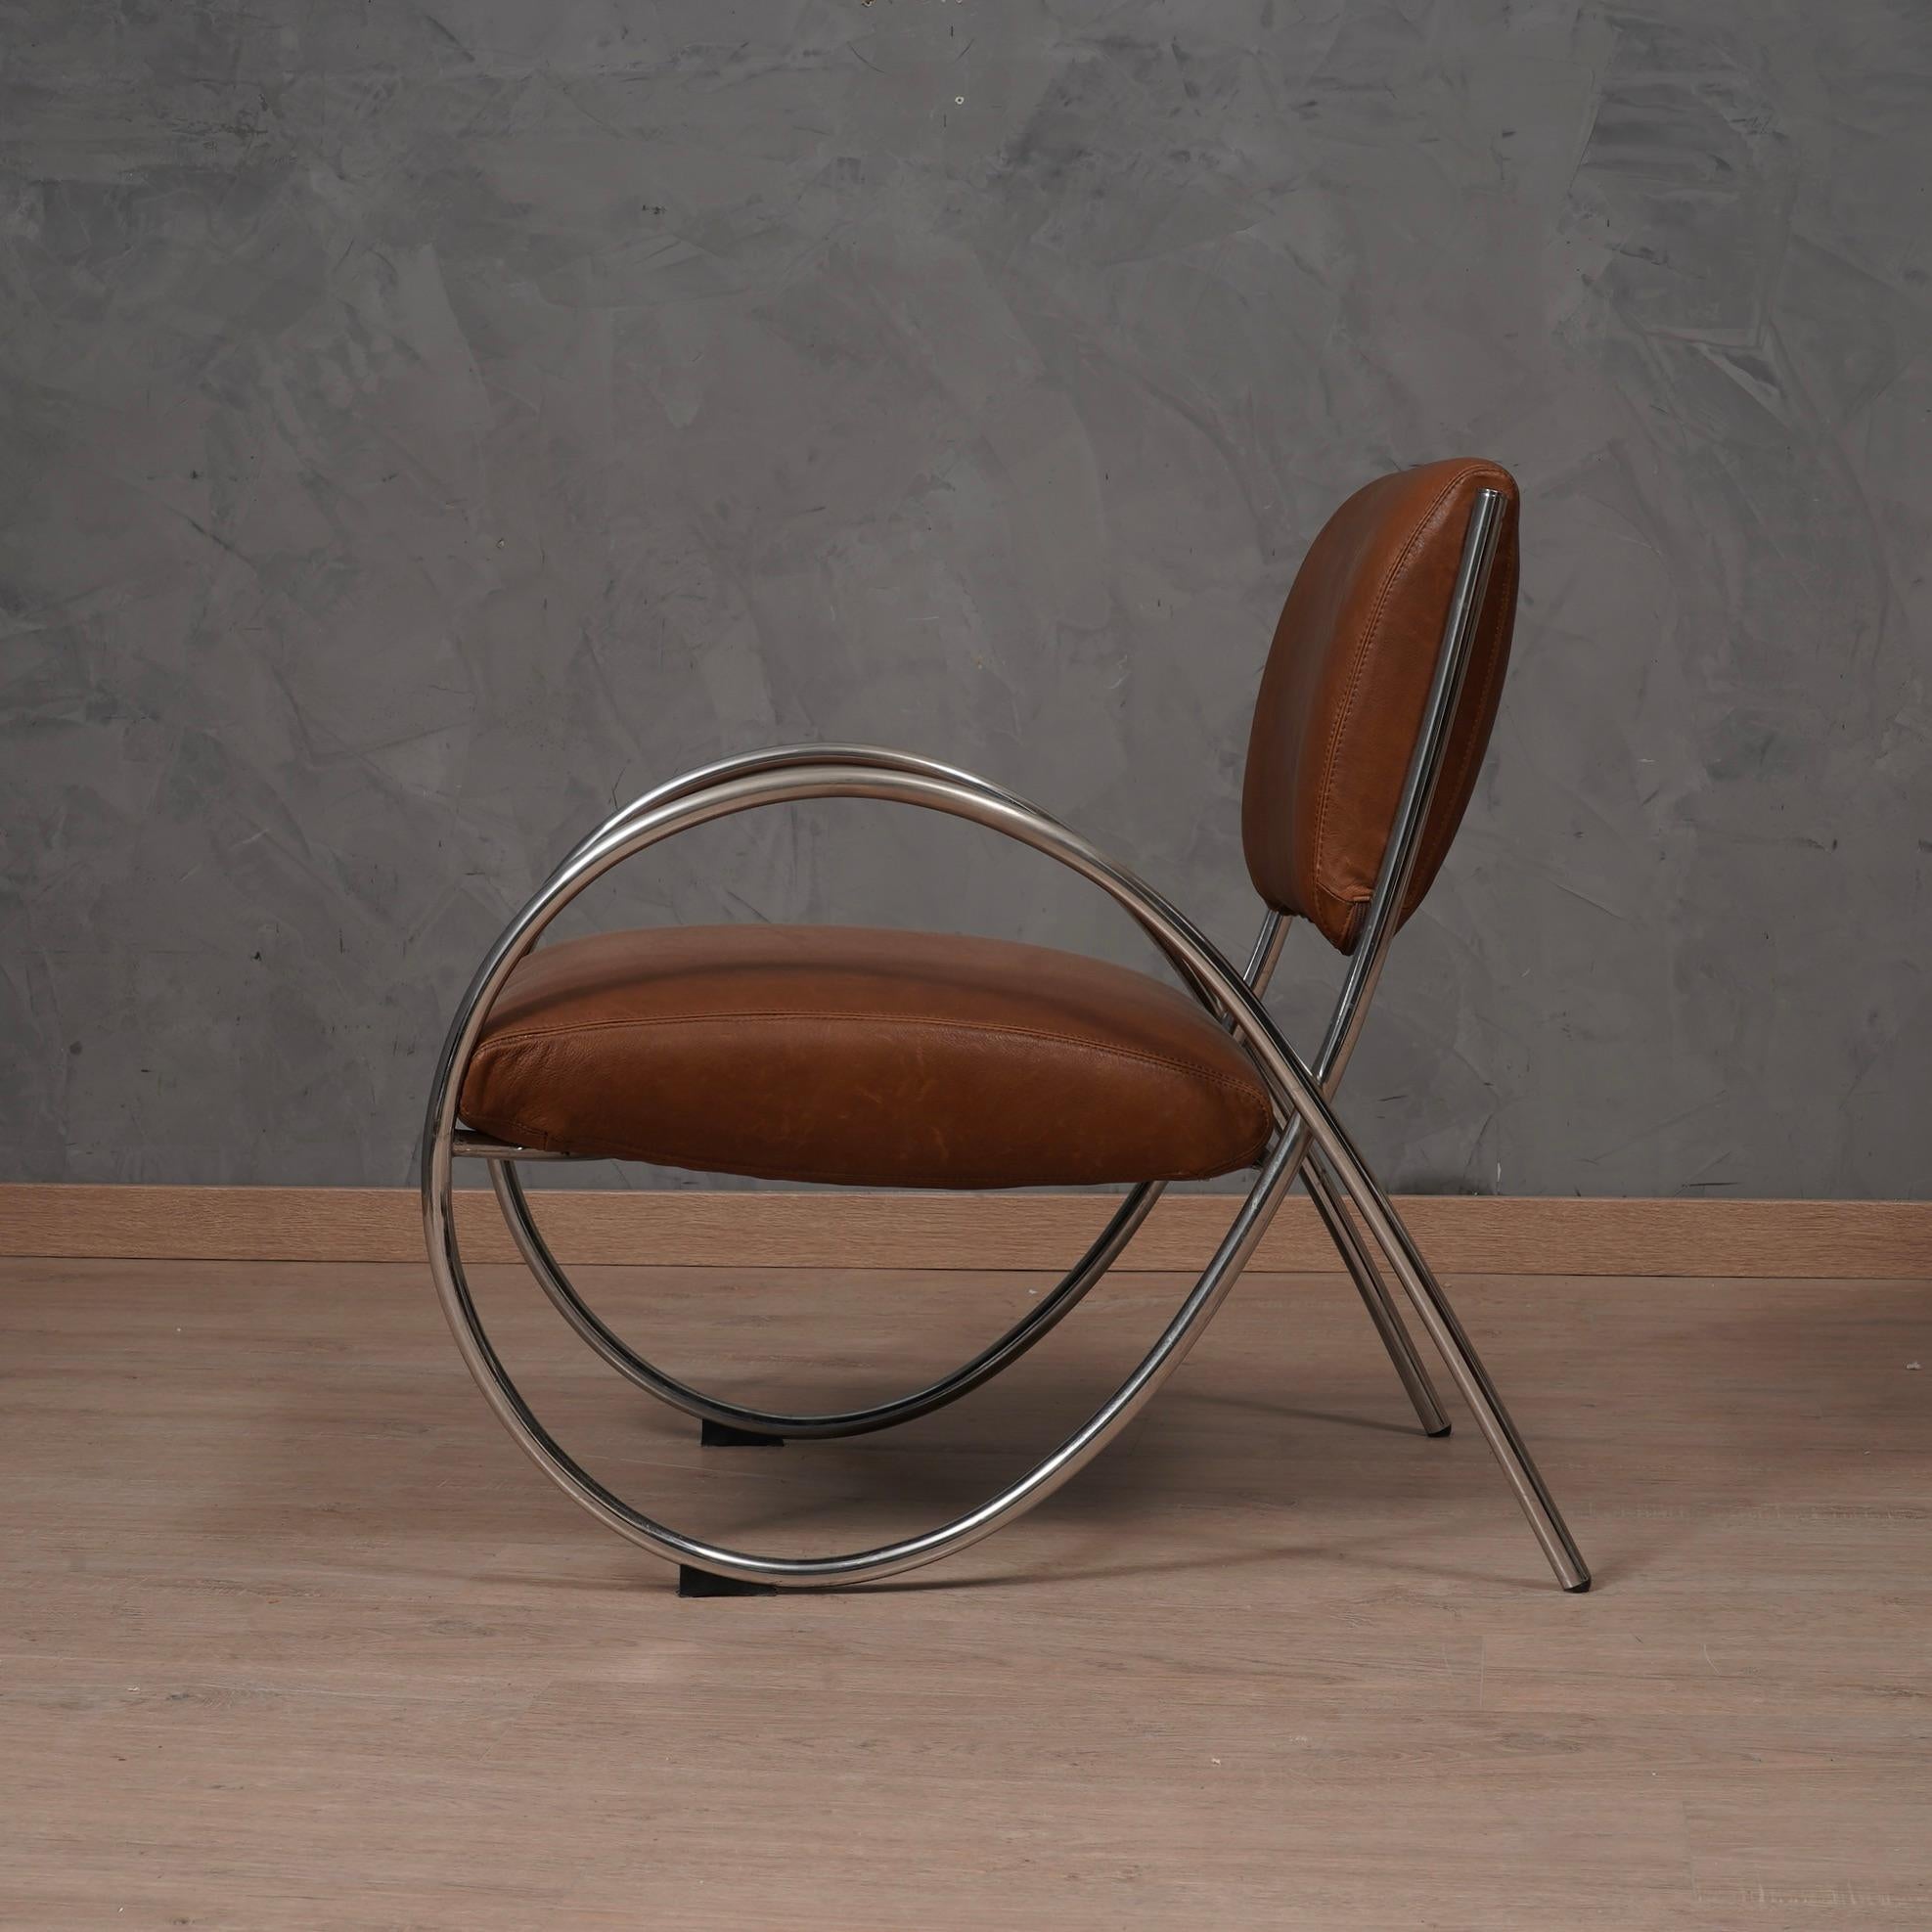 Steel MidCentury Chromed Metal and Leather Armchair, 1980 For Sale